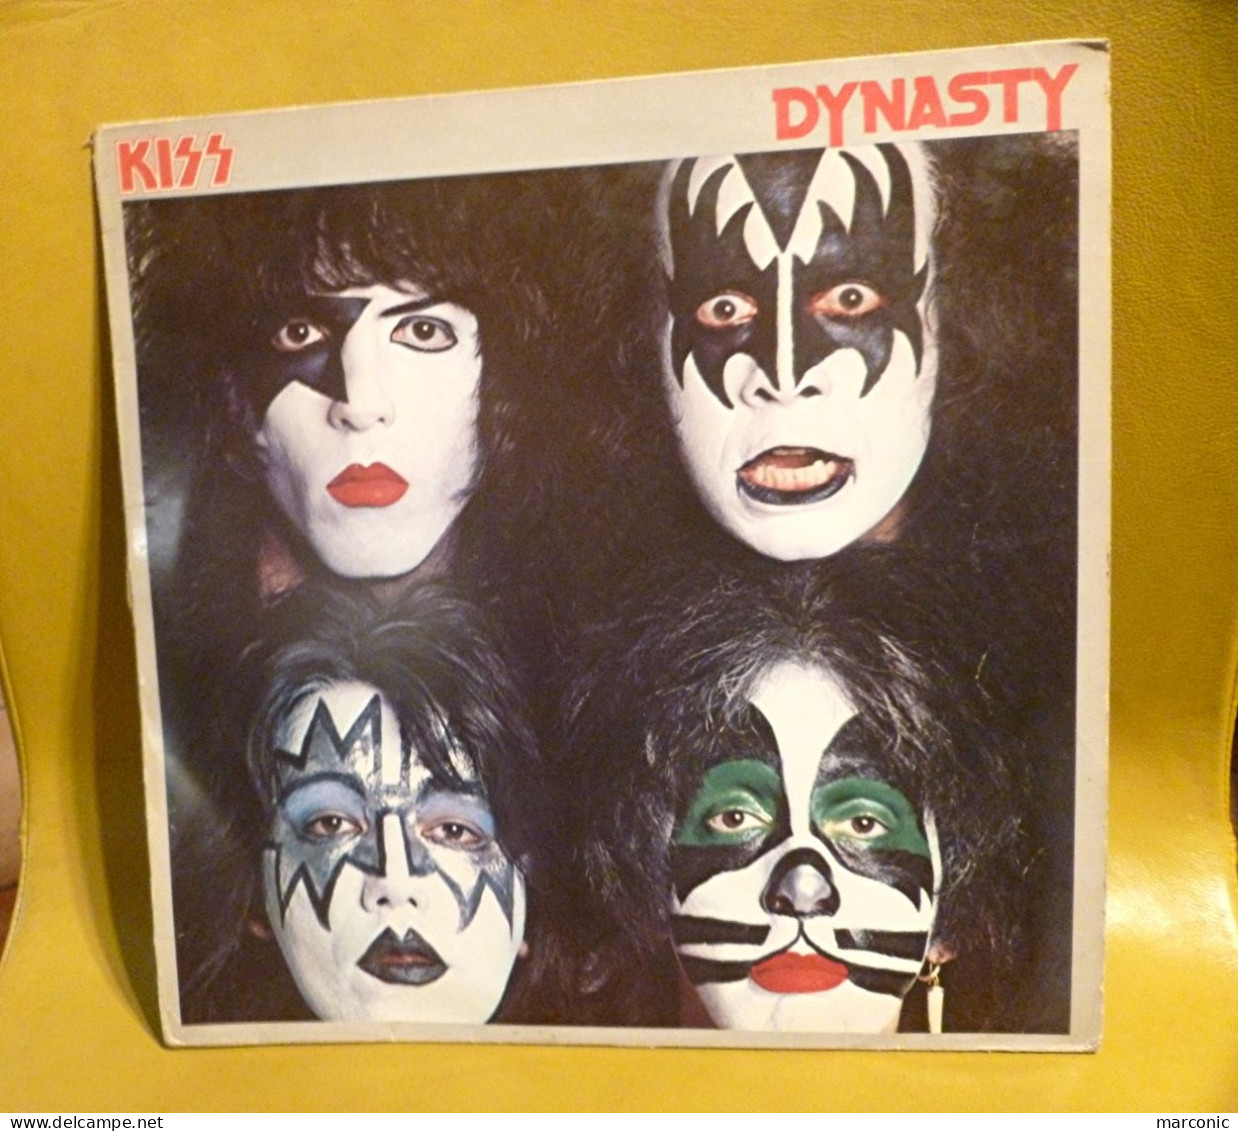 Vinyl - KISS DYNASTY - 1979 - 33 T - Other - English Music